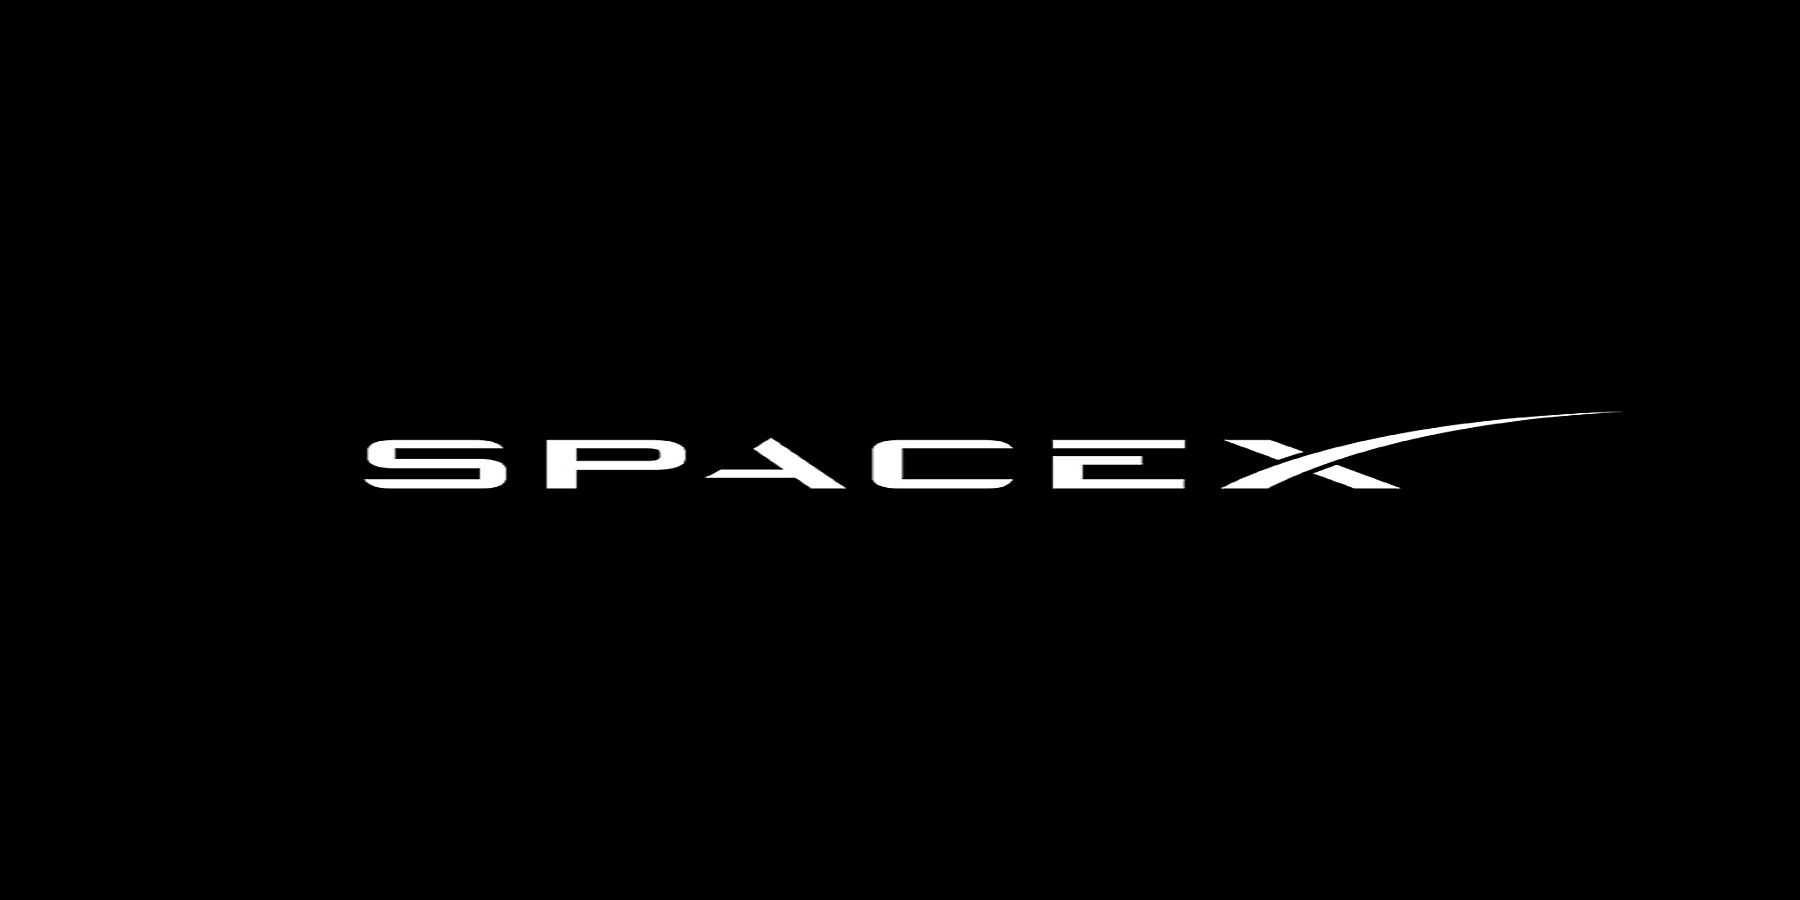 spacex-logo